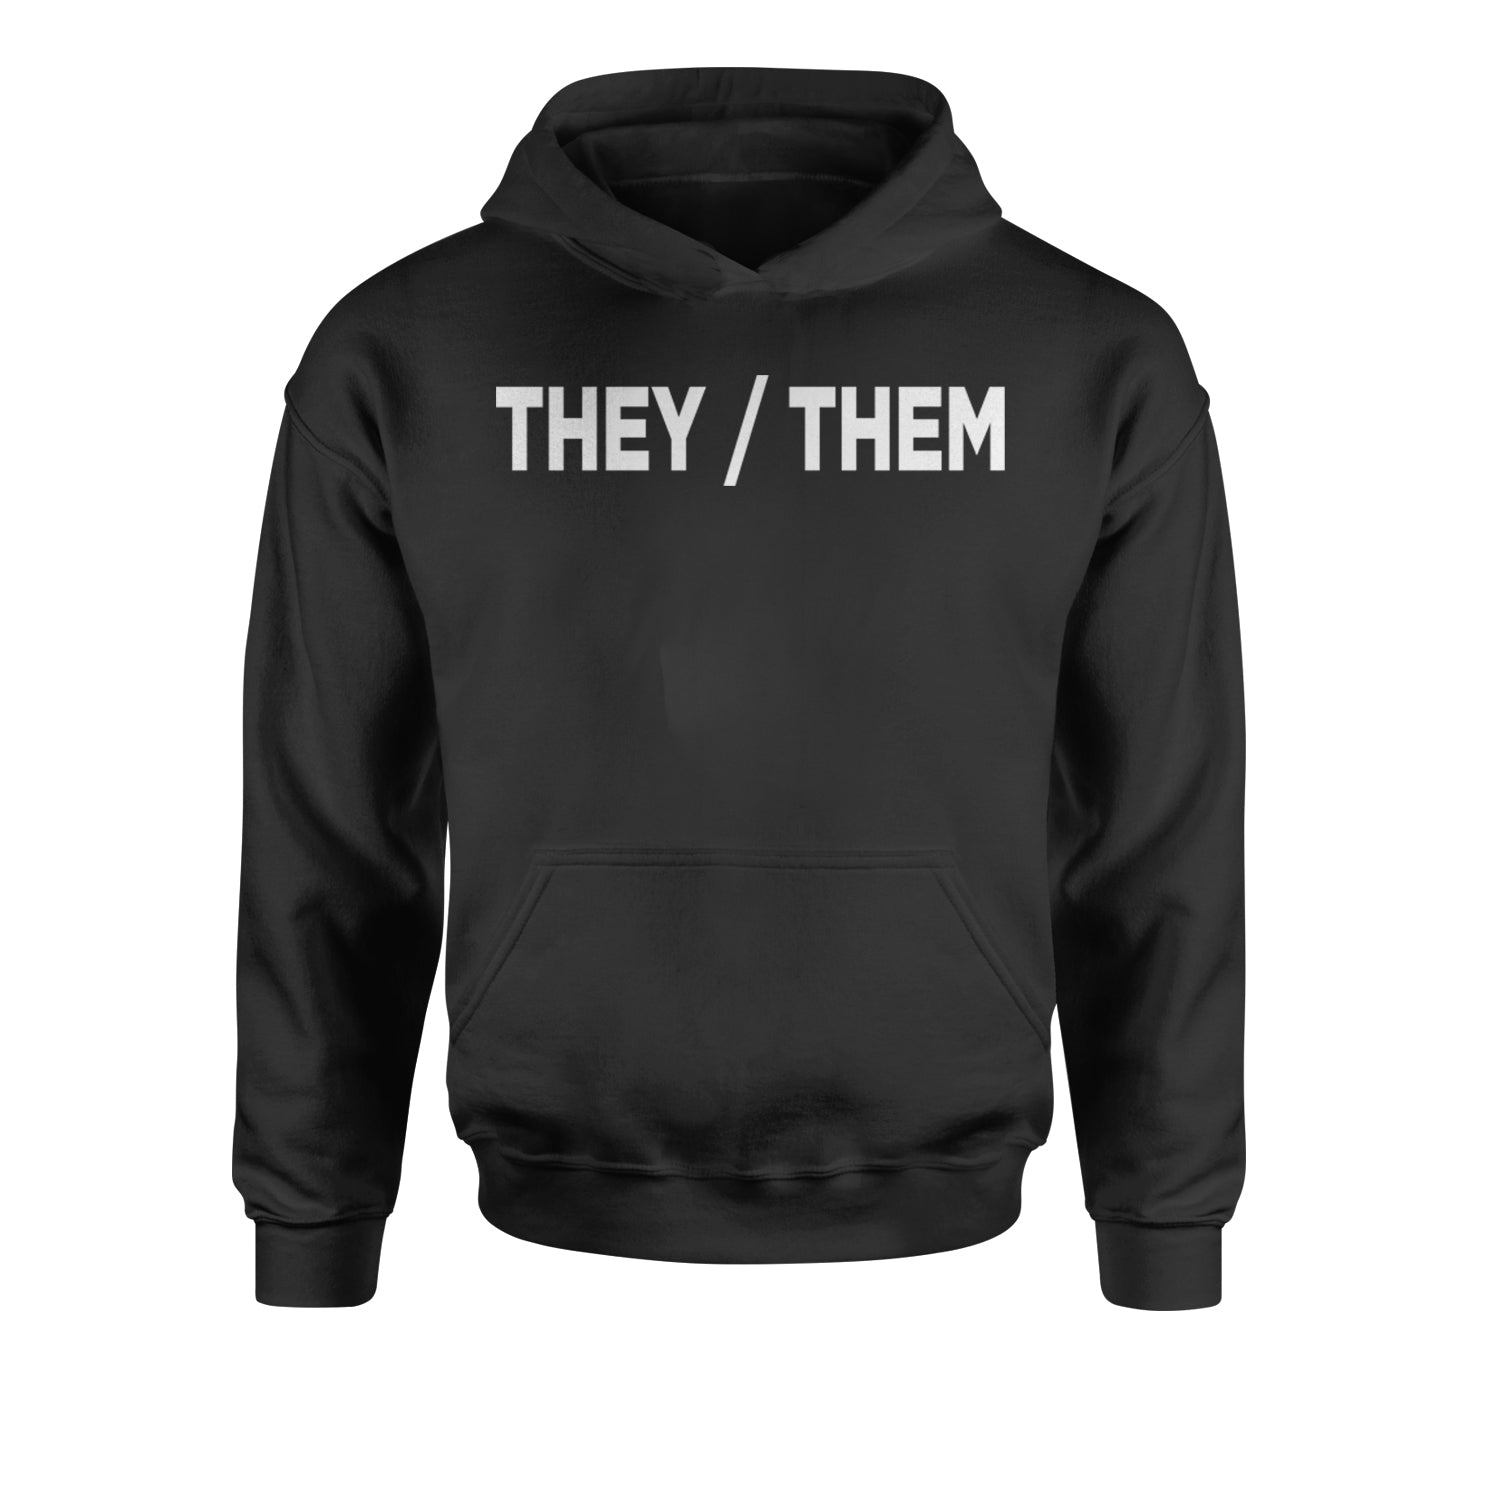 They Them Gender Pronouns Diversity and Inclusion Youth-Sized Hoodie binary, civil, gay, he, her, him, nonbinary, pride, rights, she, them, they by Expression Tees